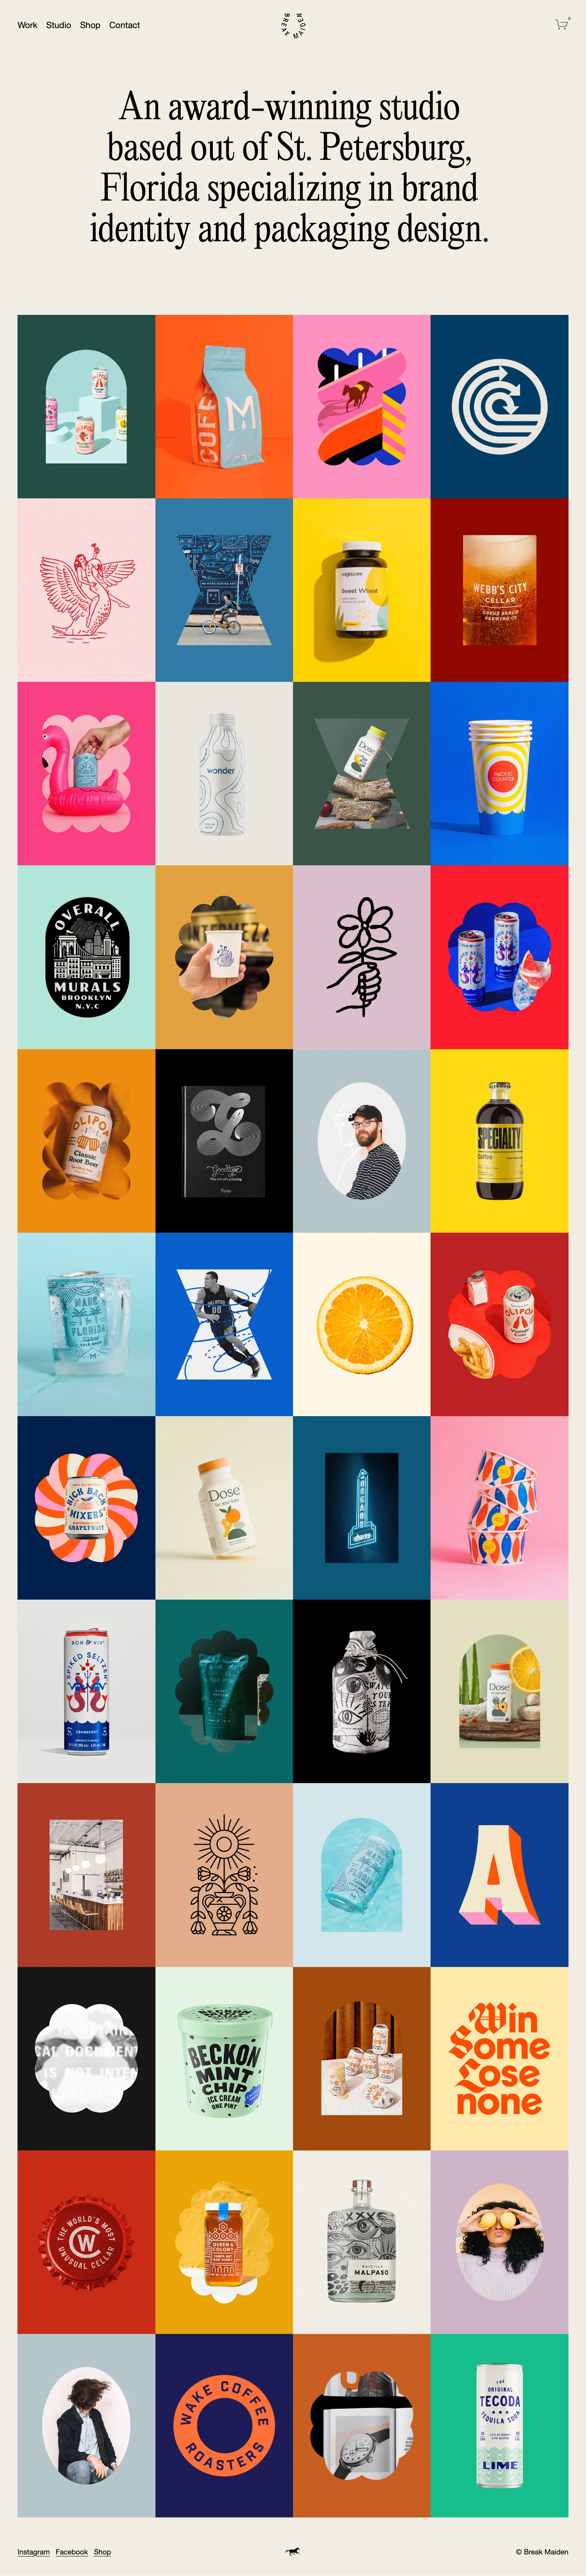 Break Maiden Landing Page Example: An award-winning studio based out of St. Petersburg, Florida specializing in brand identity and packaging design.